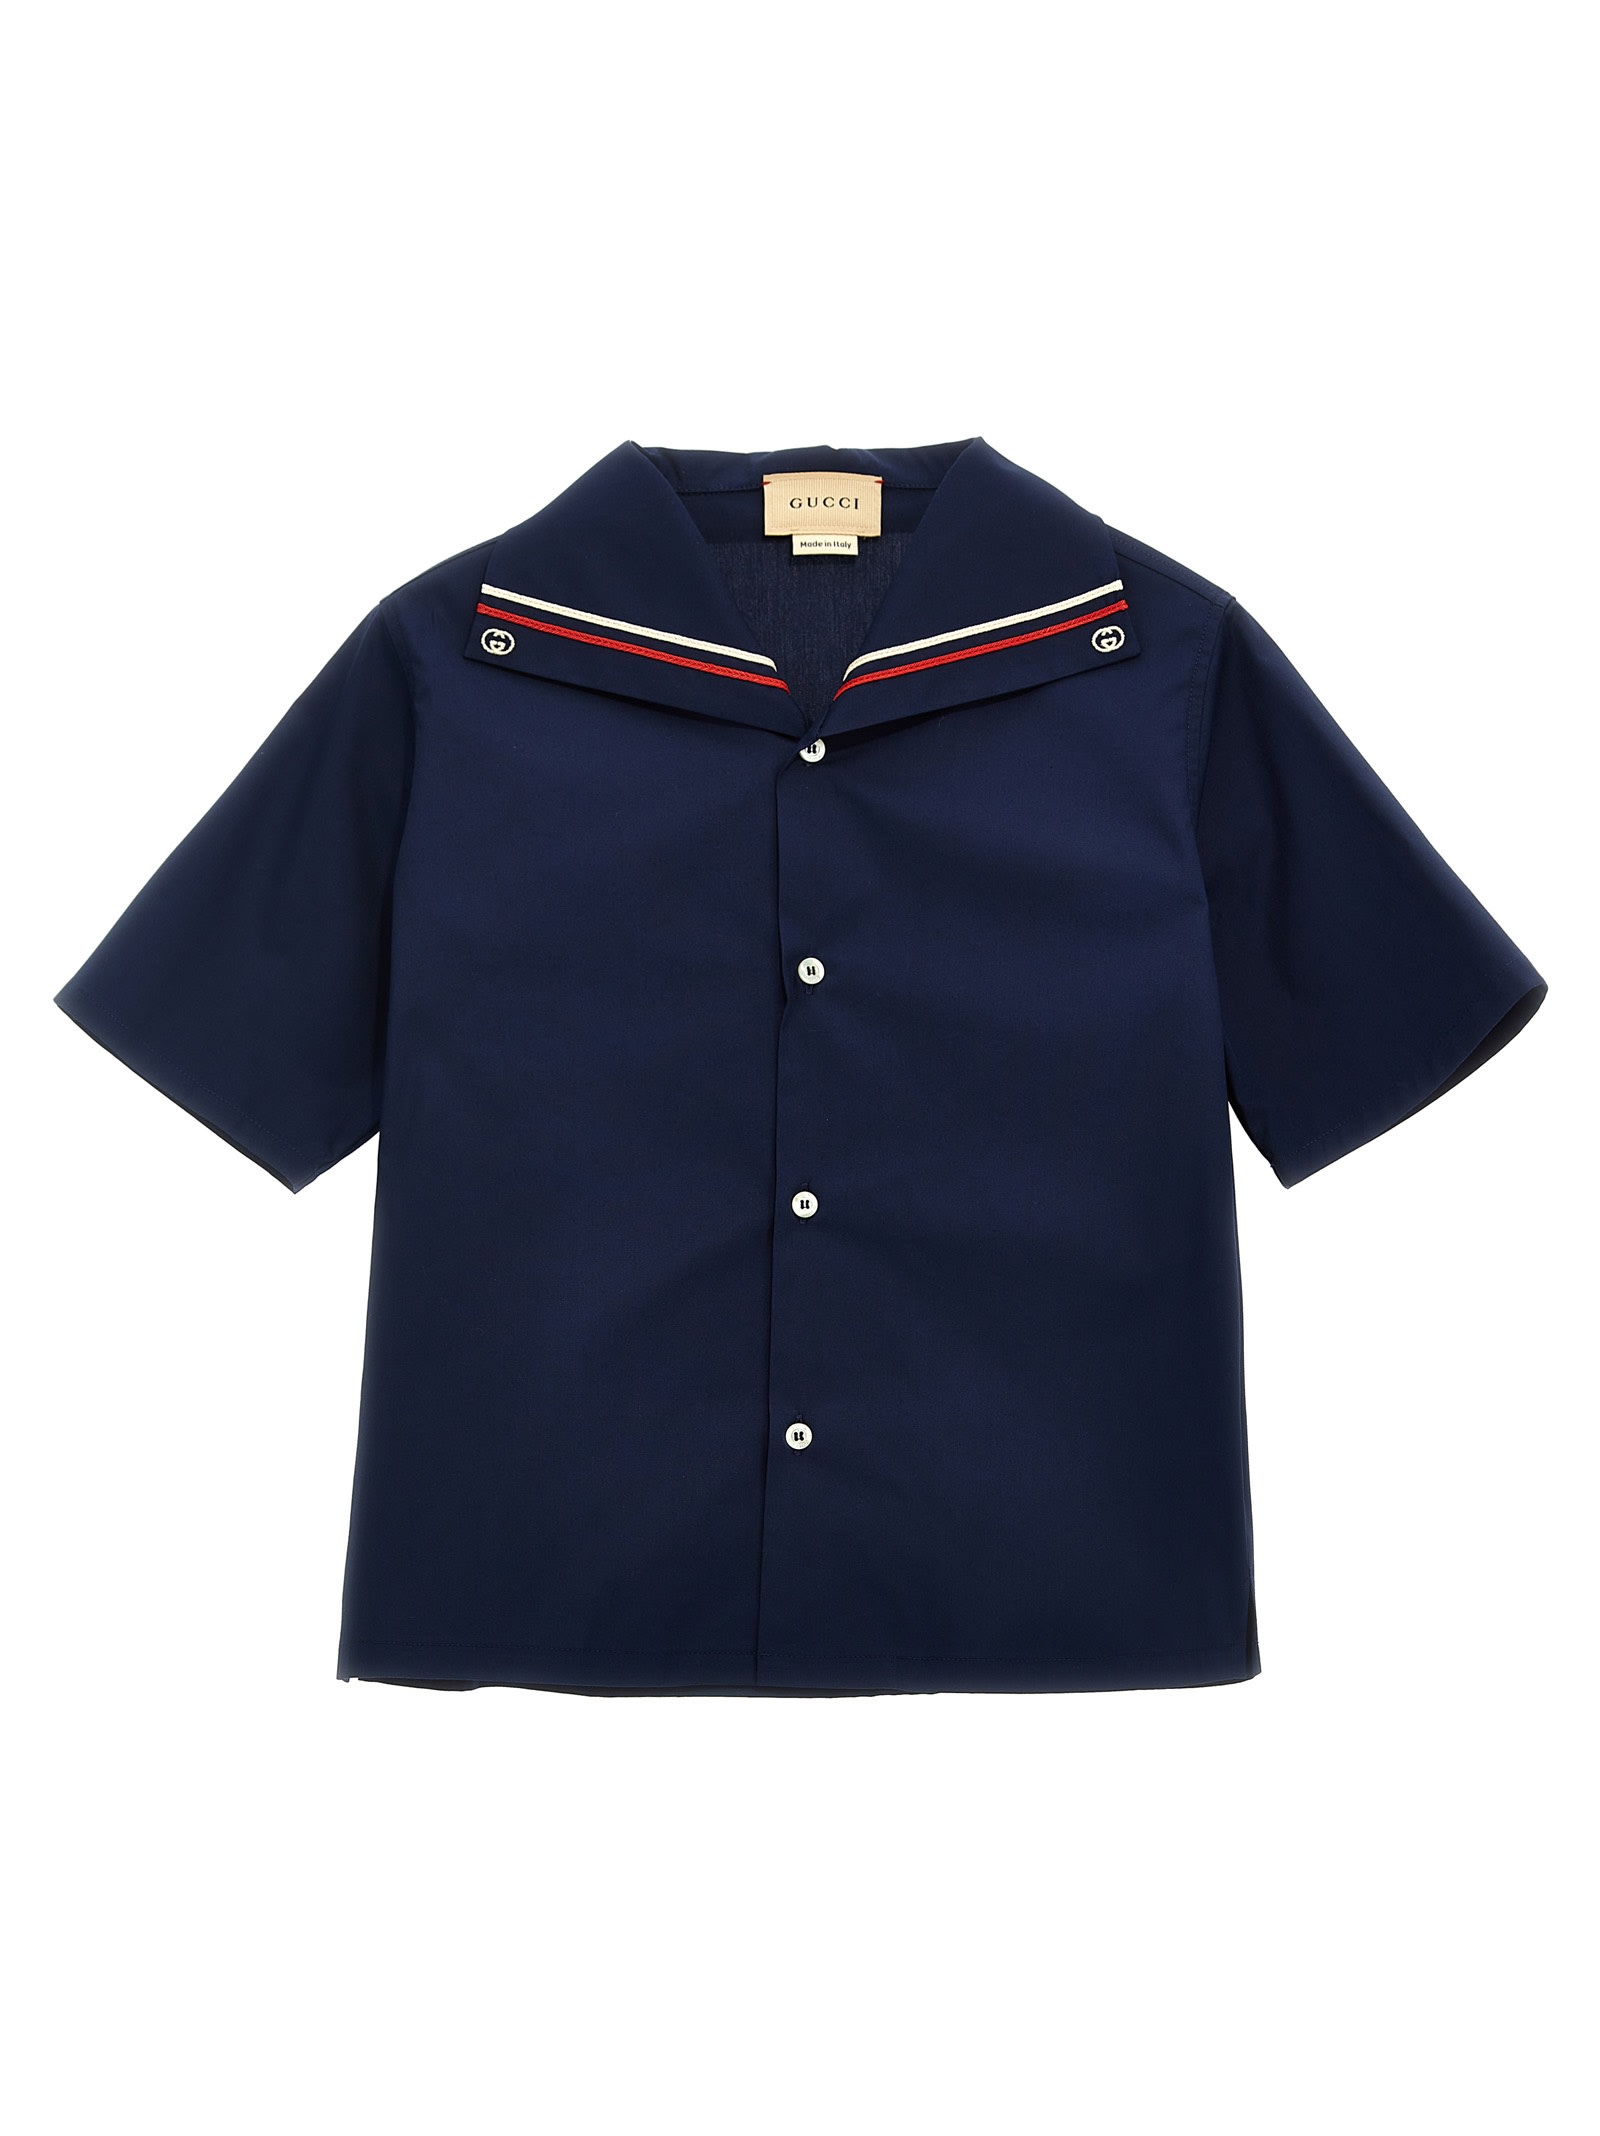 Gucci Kids' Collar Embroidery Shirt In Blue